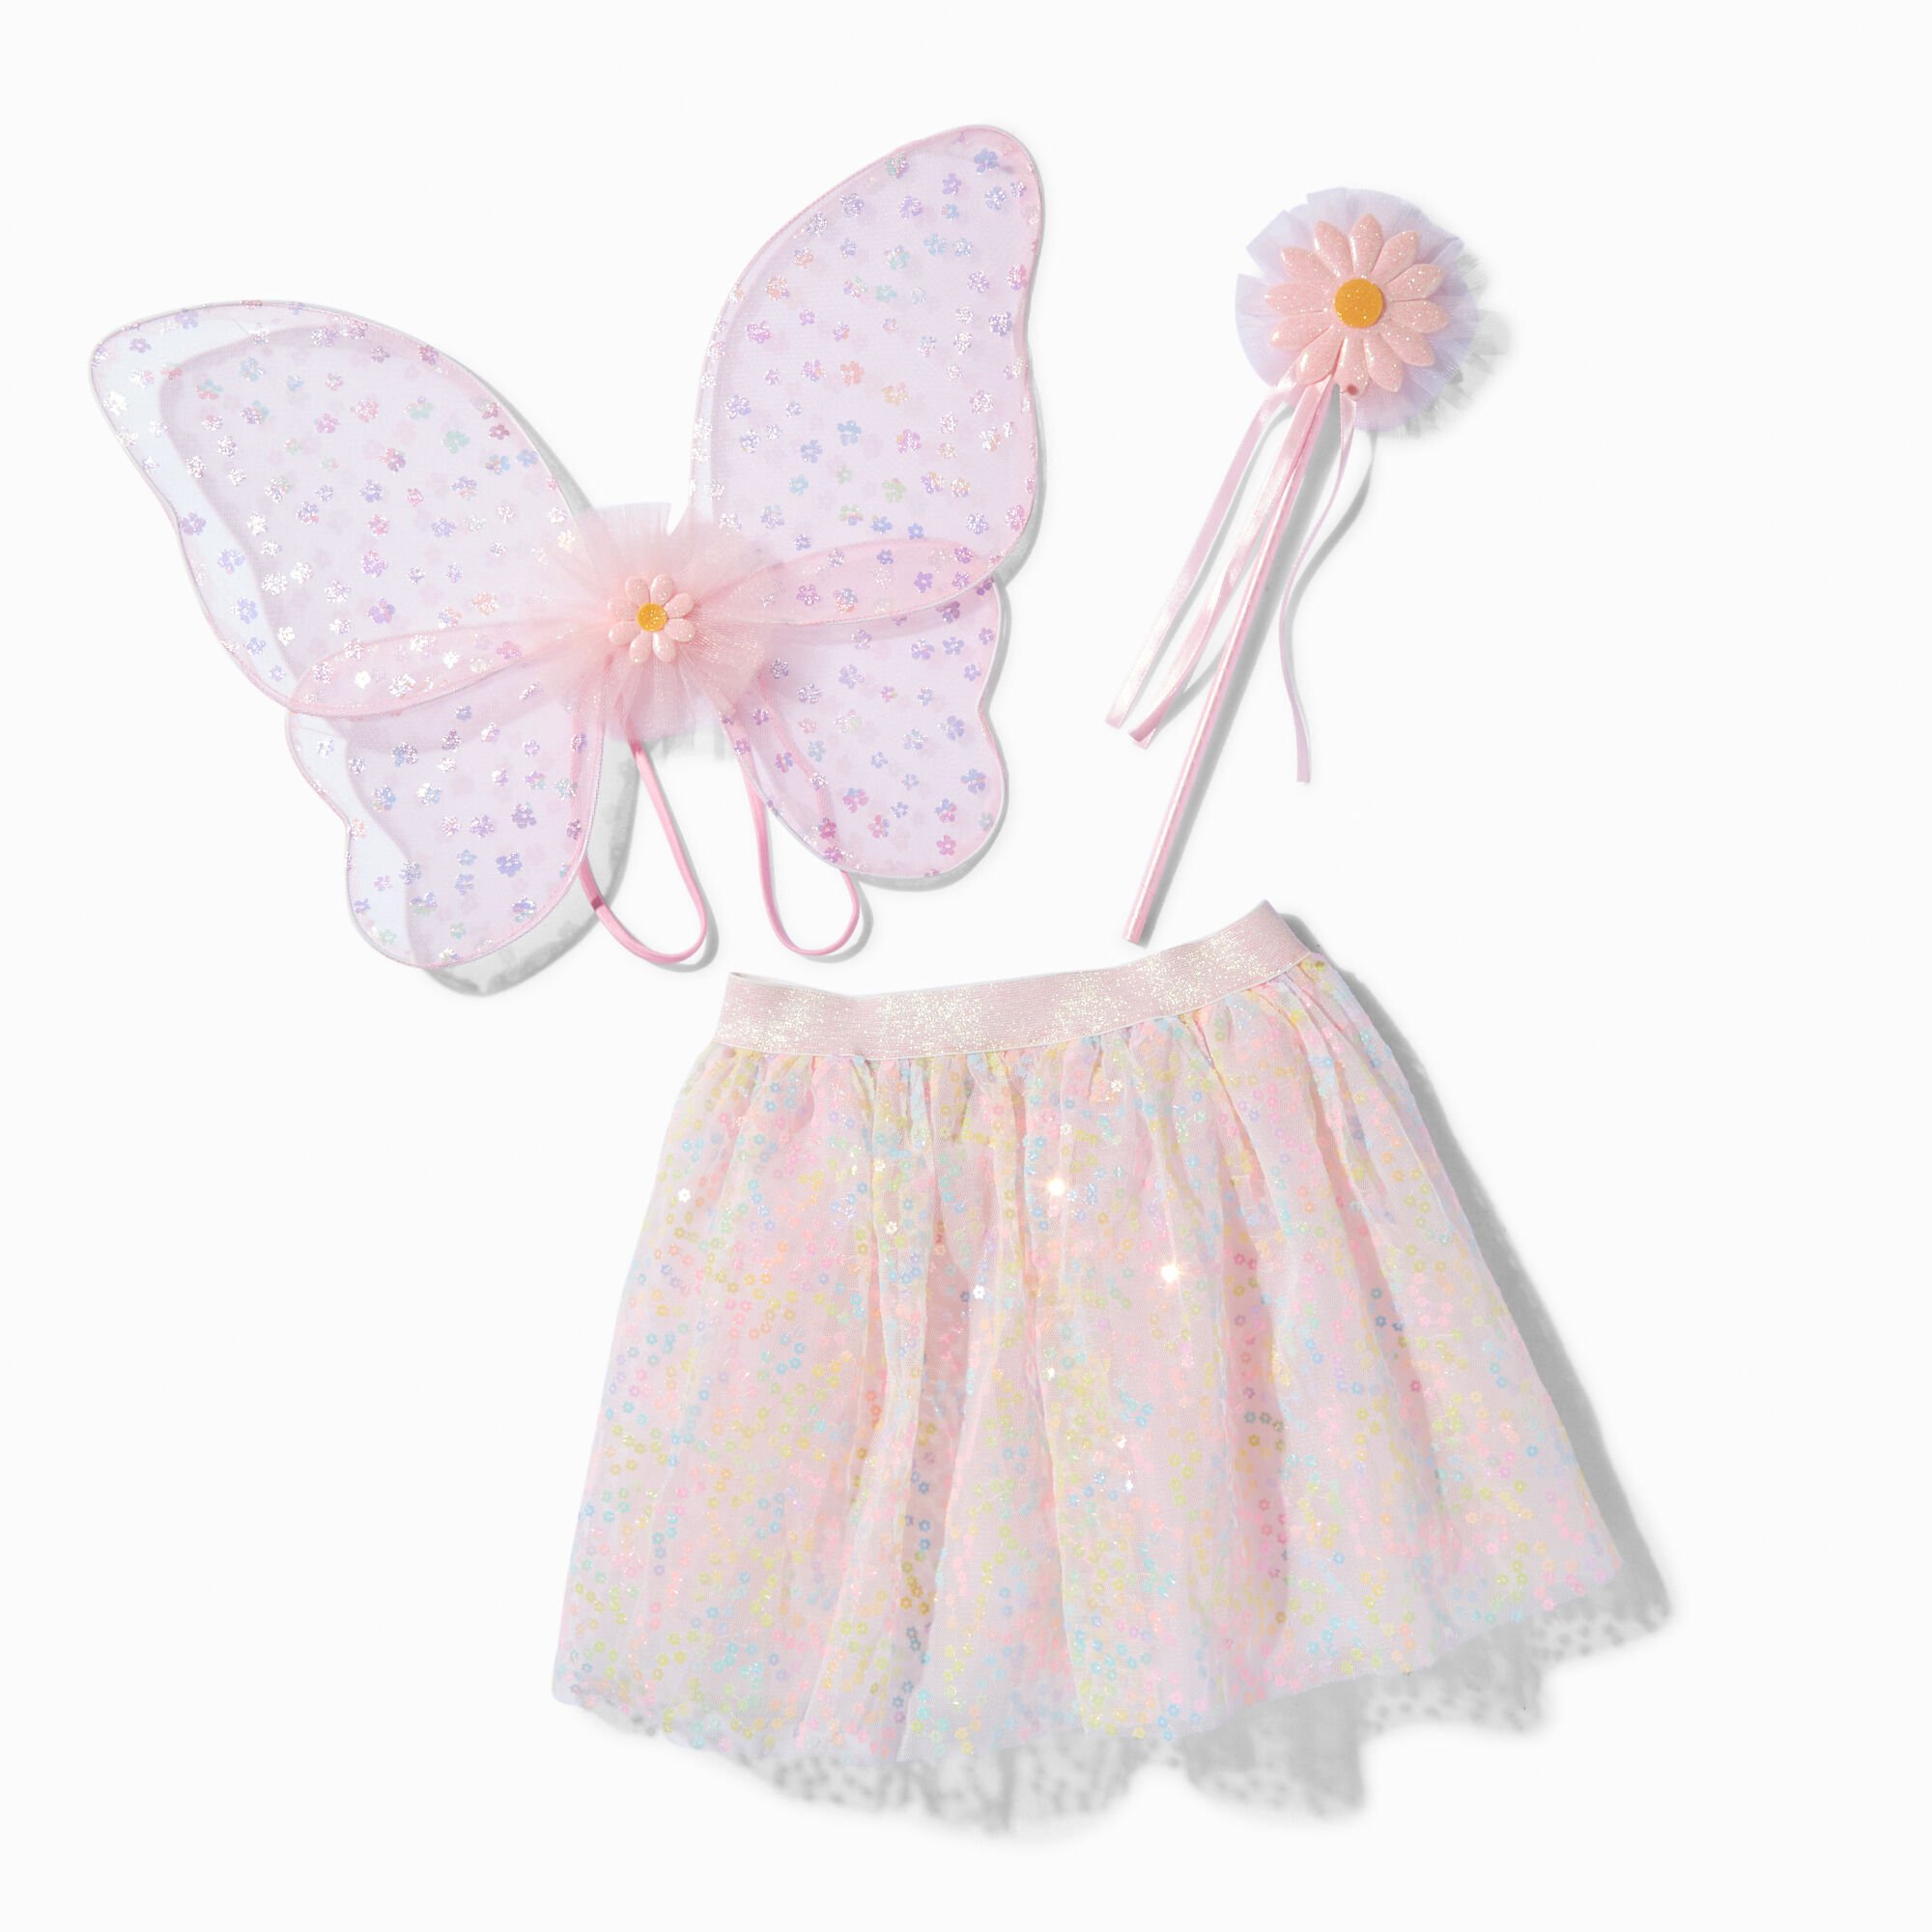 View Claires Club Sequin Daisy Dress Up Set 3 Pack information